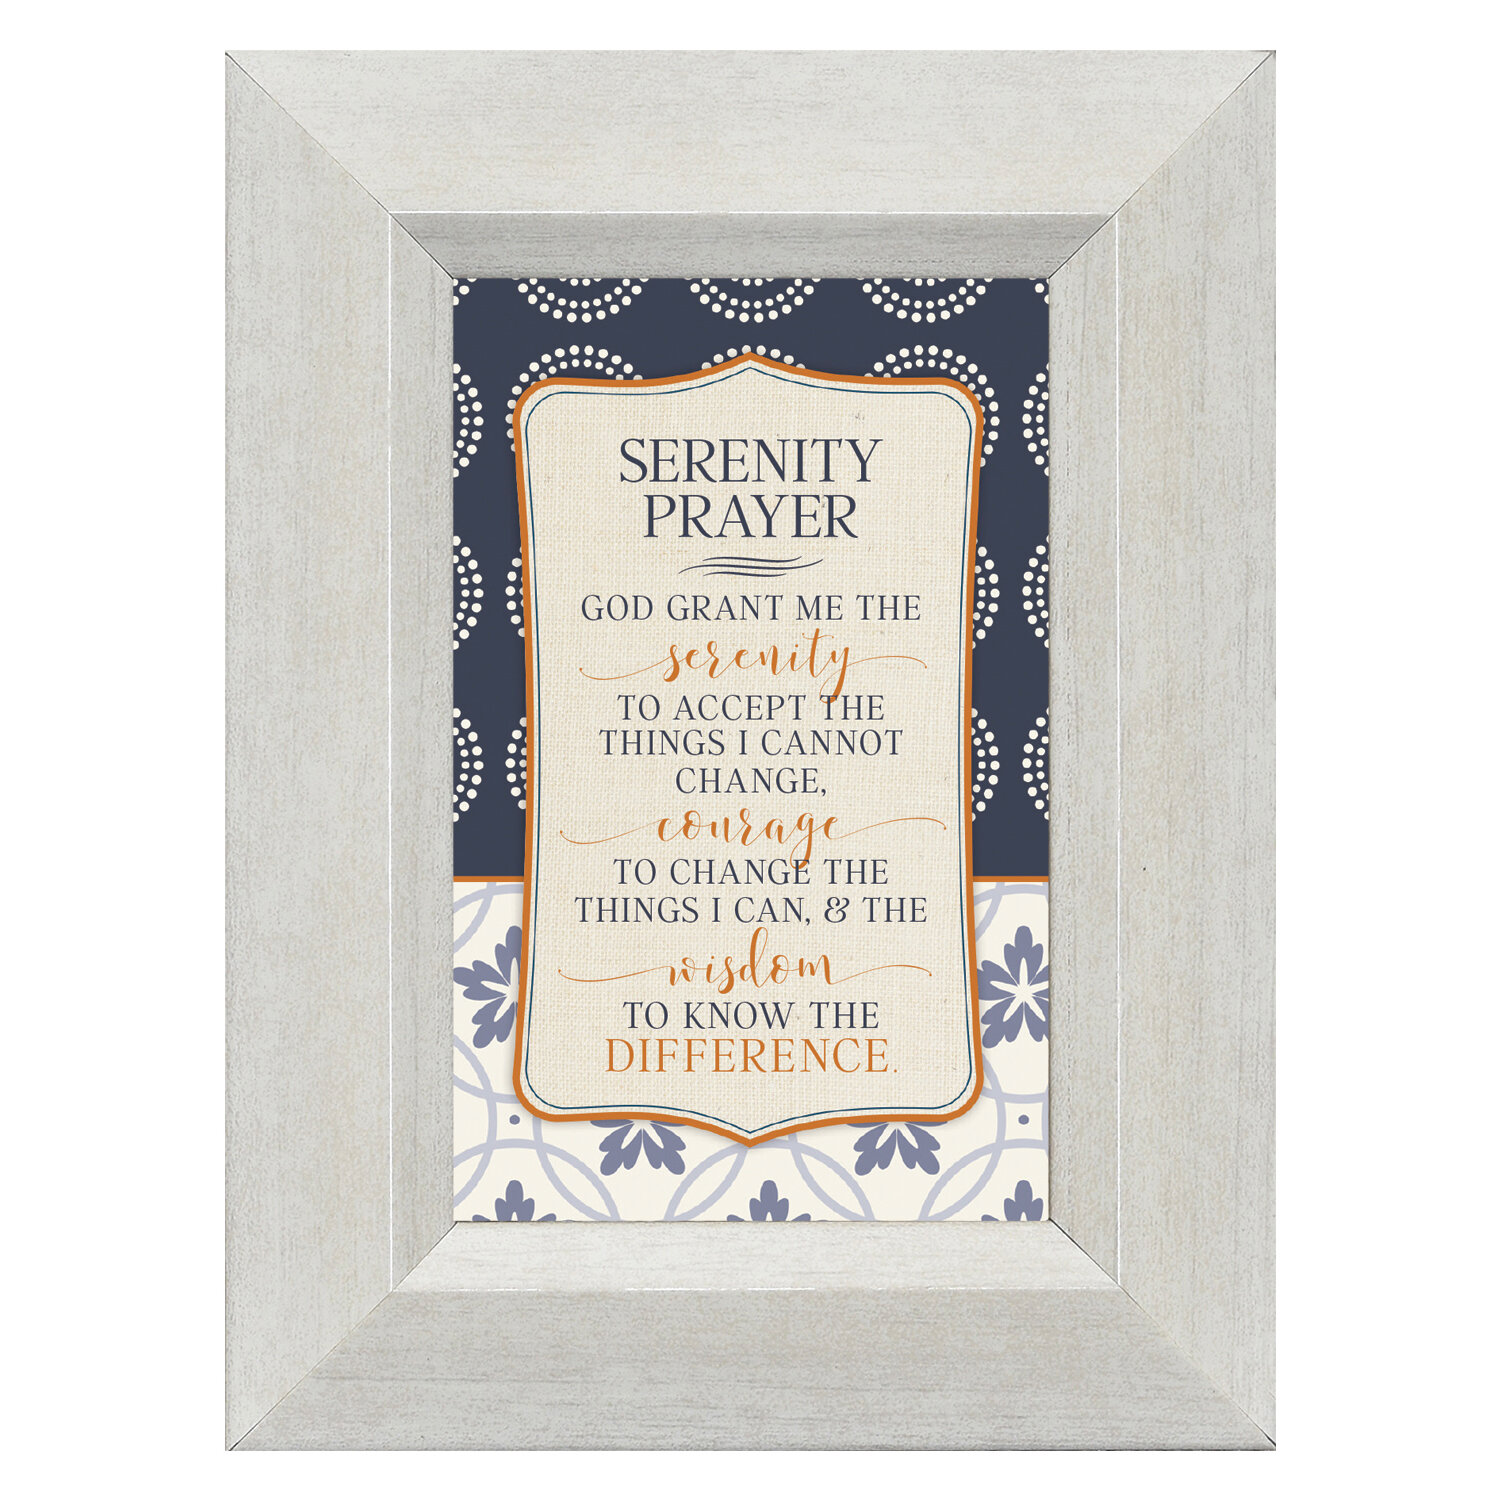 Serenity Prayer Sign God grant me the Serenity to accept the things I cannot